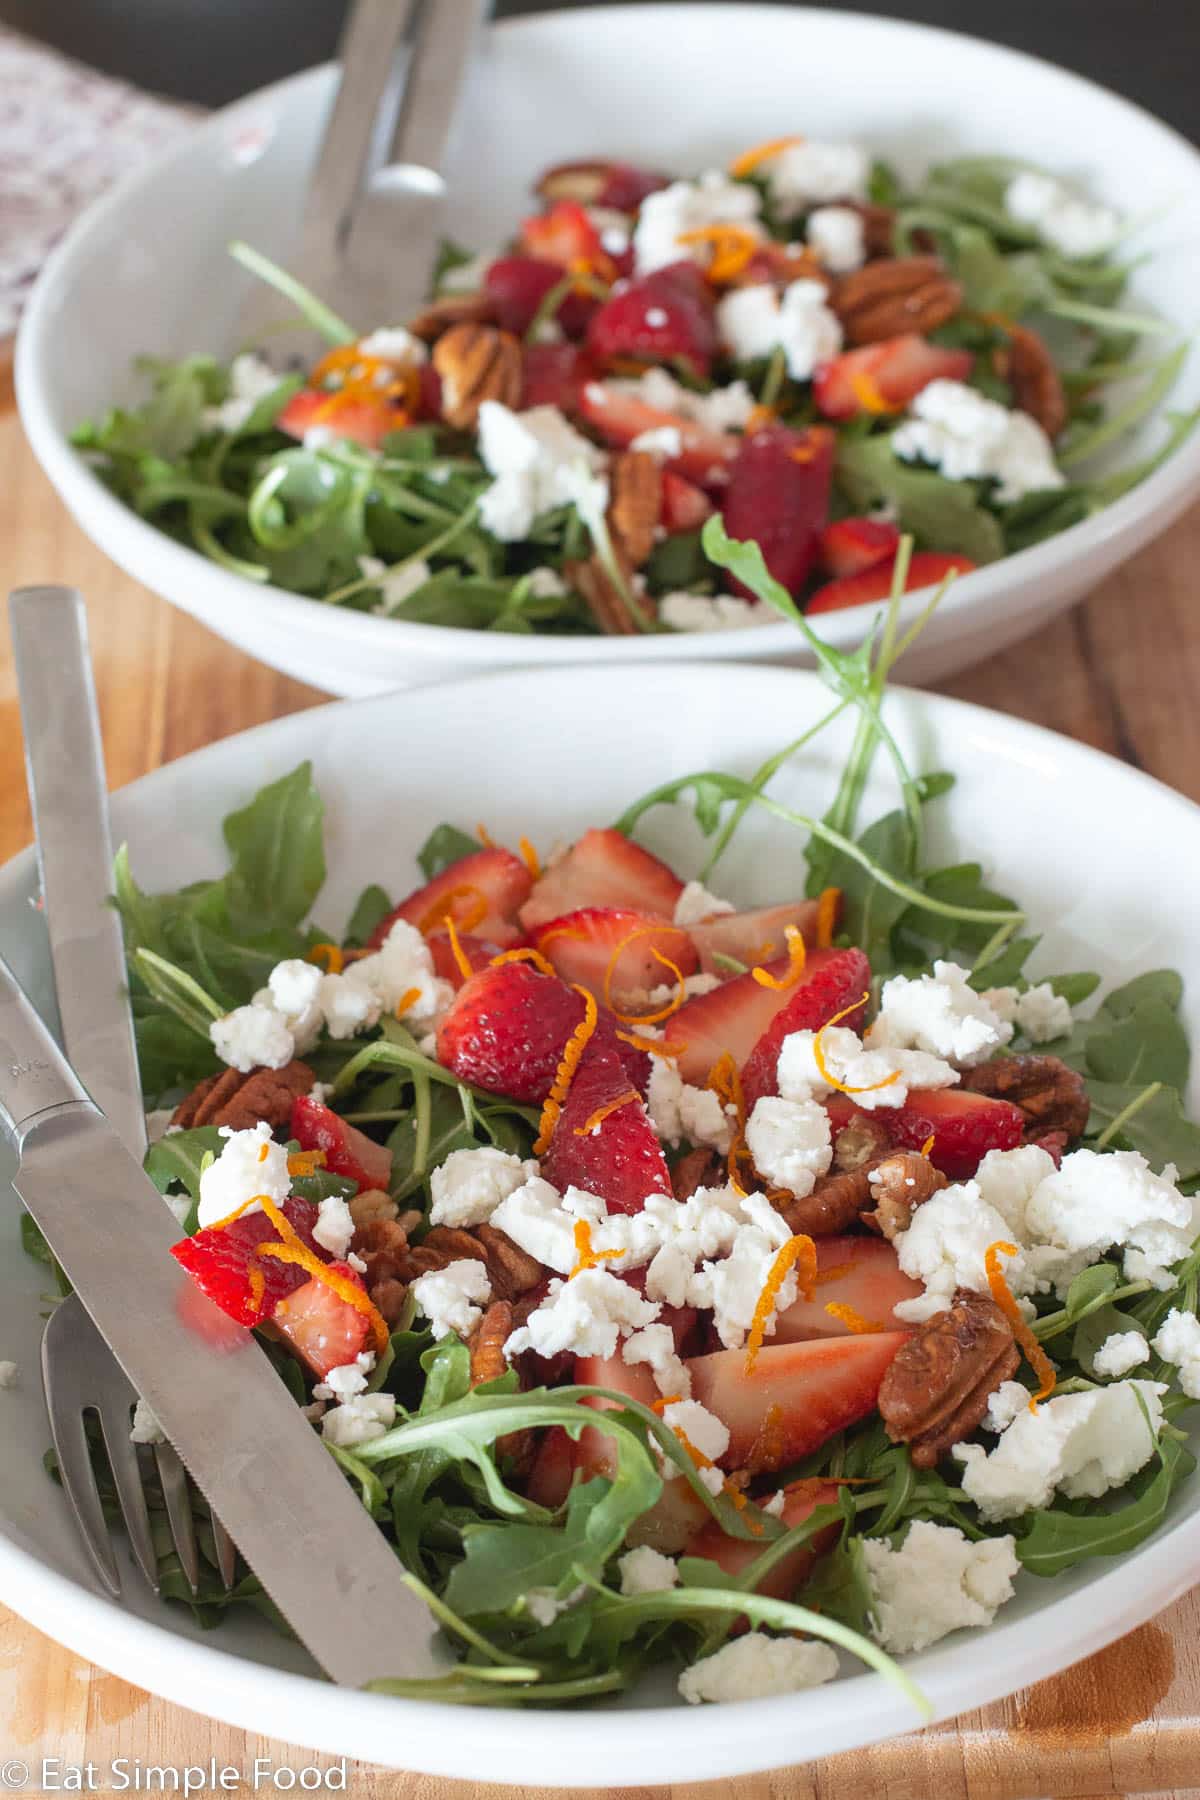 Side view of two white rimmed plates with forks and knives sticking out on a wood cutting board. Plates are filled with arugula, quartered strawberries, white goat cheese crumbles, pecans, and orange zest.